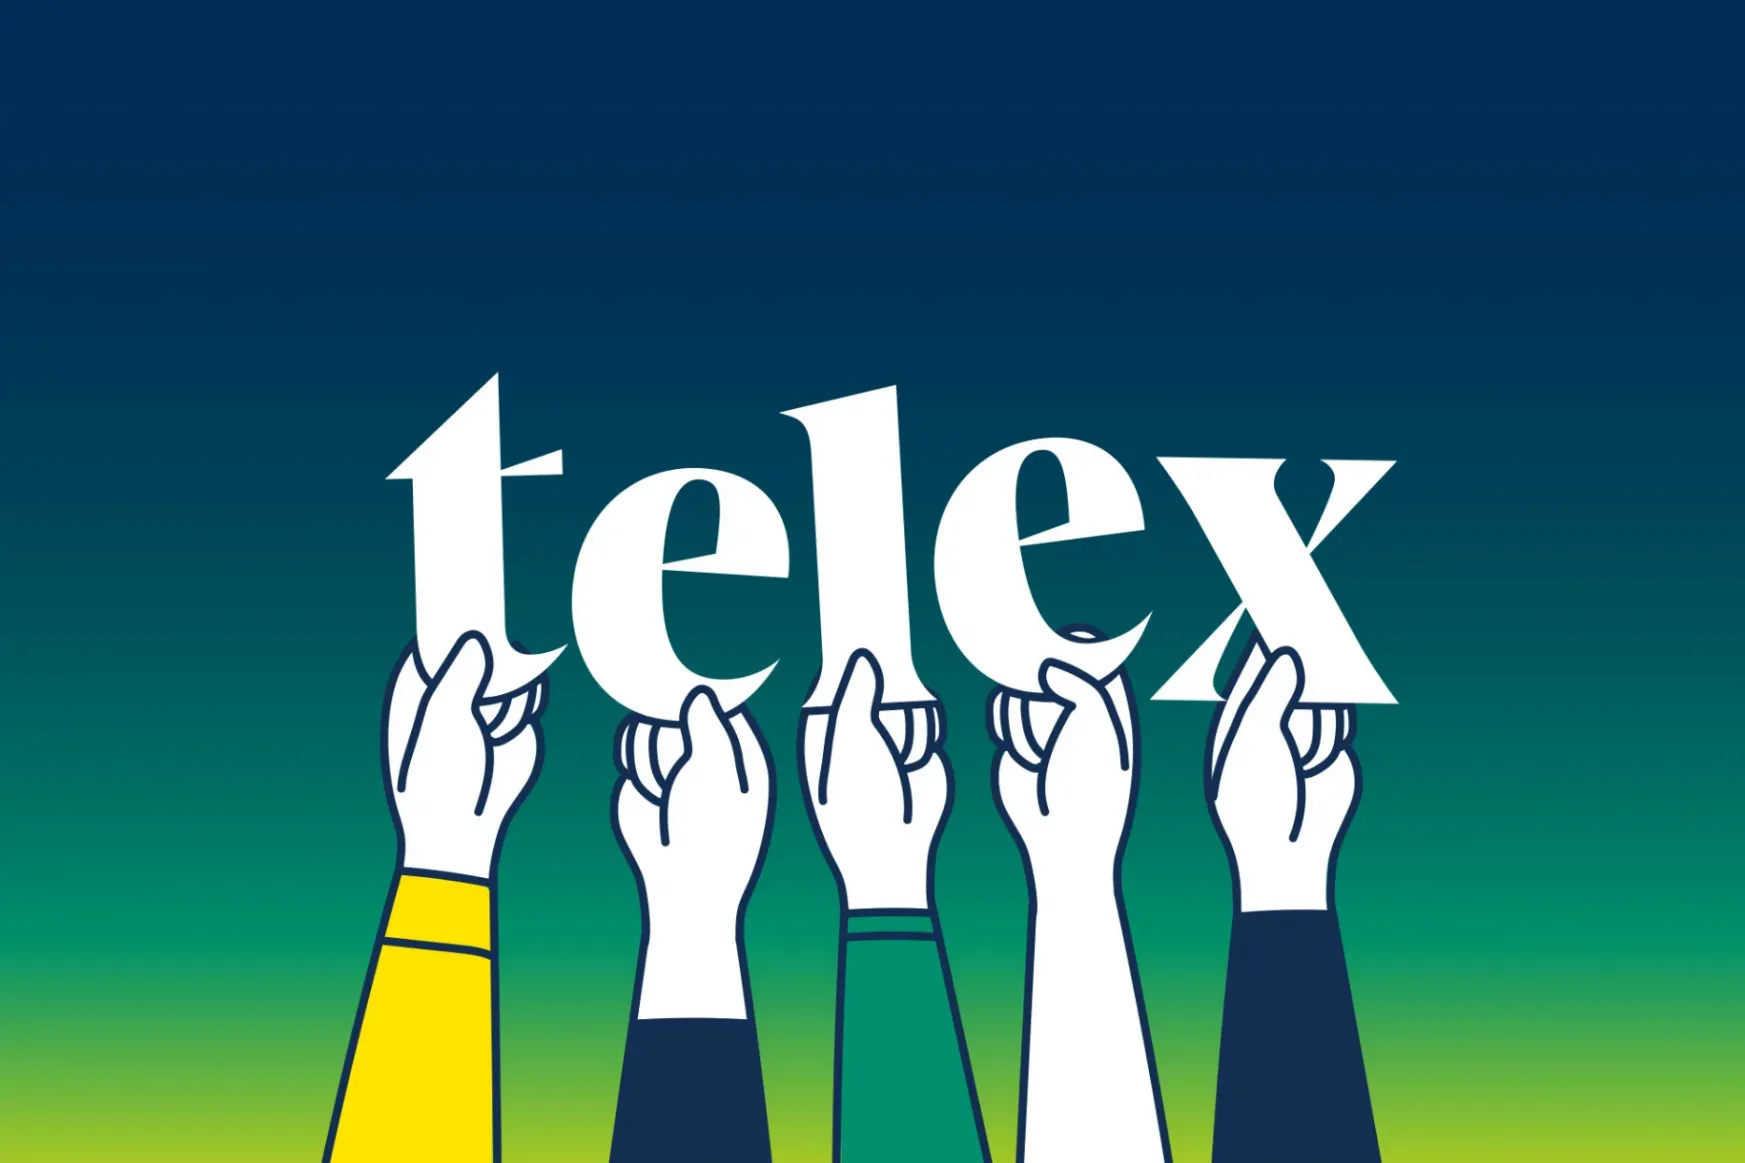 Telex will belong to the Telex team: the publisher of Telex becomes employee-owned